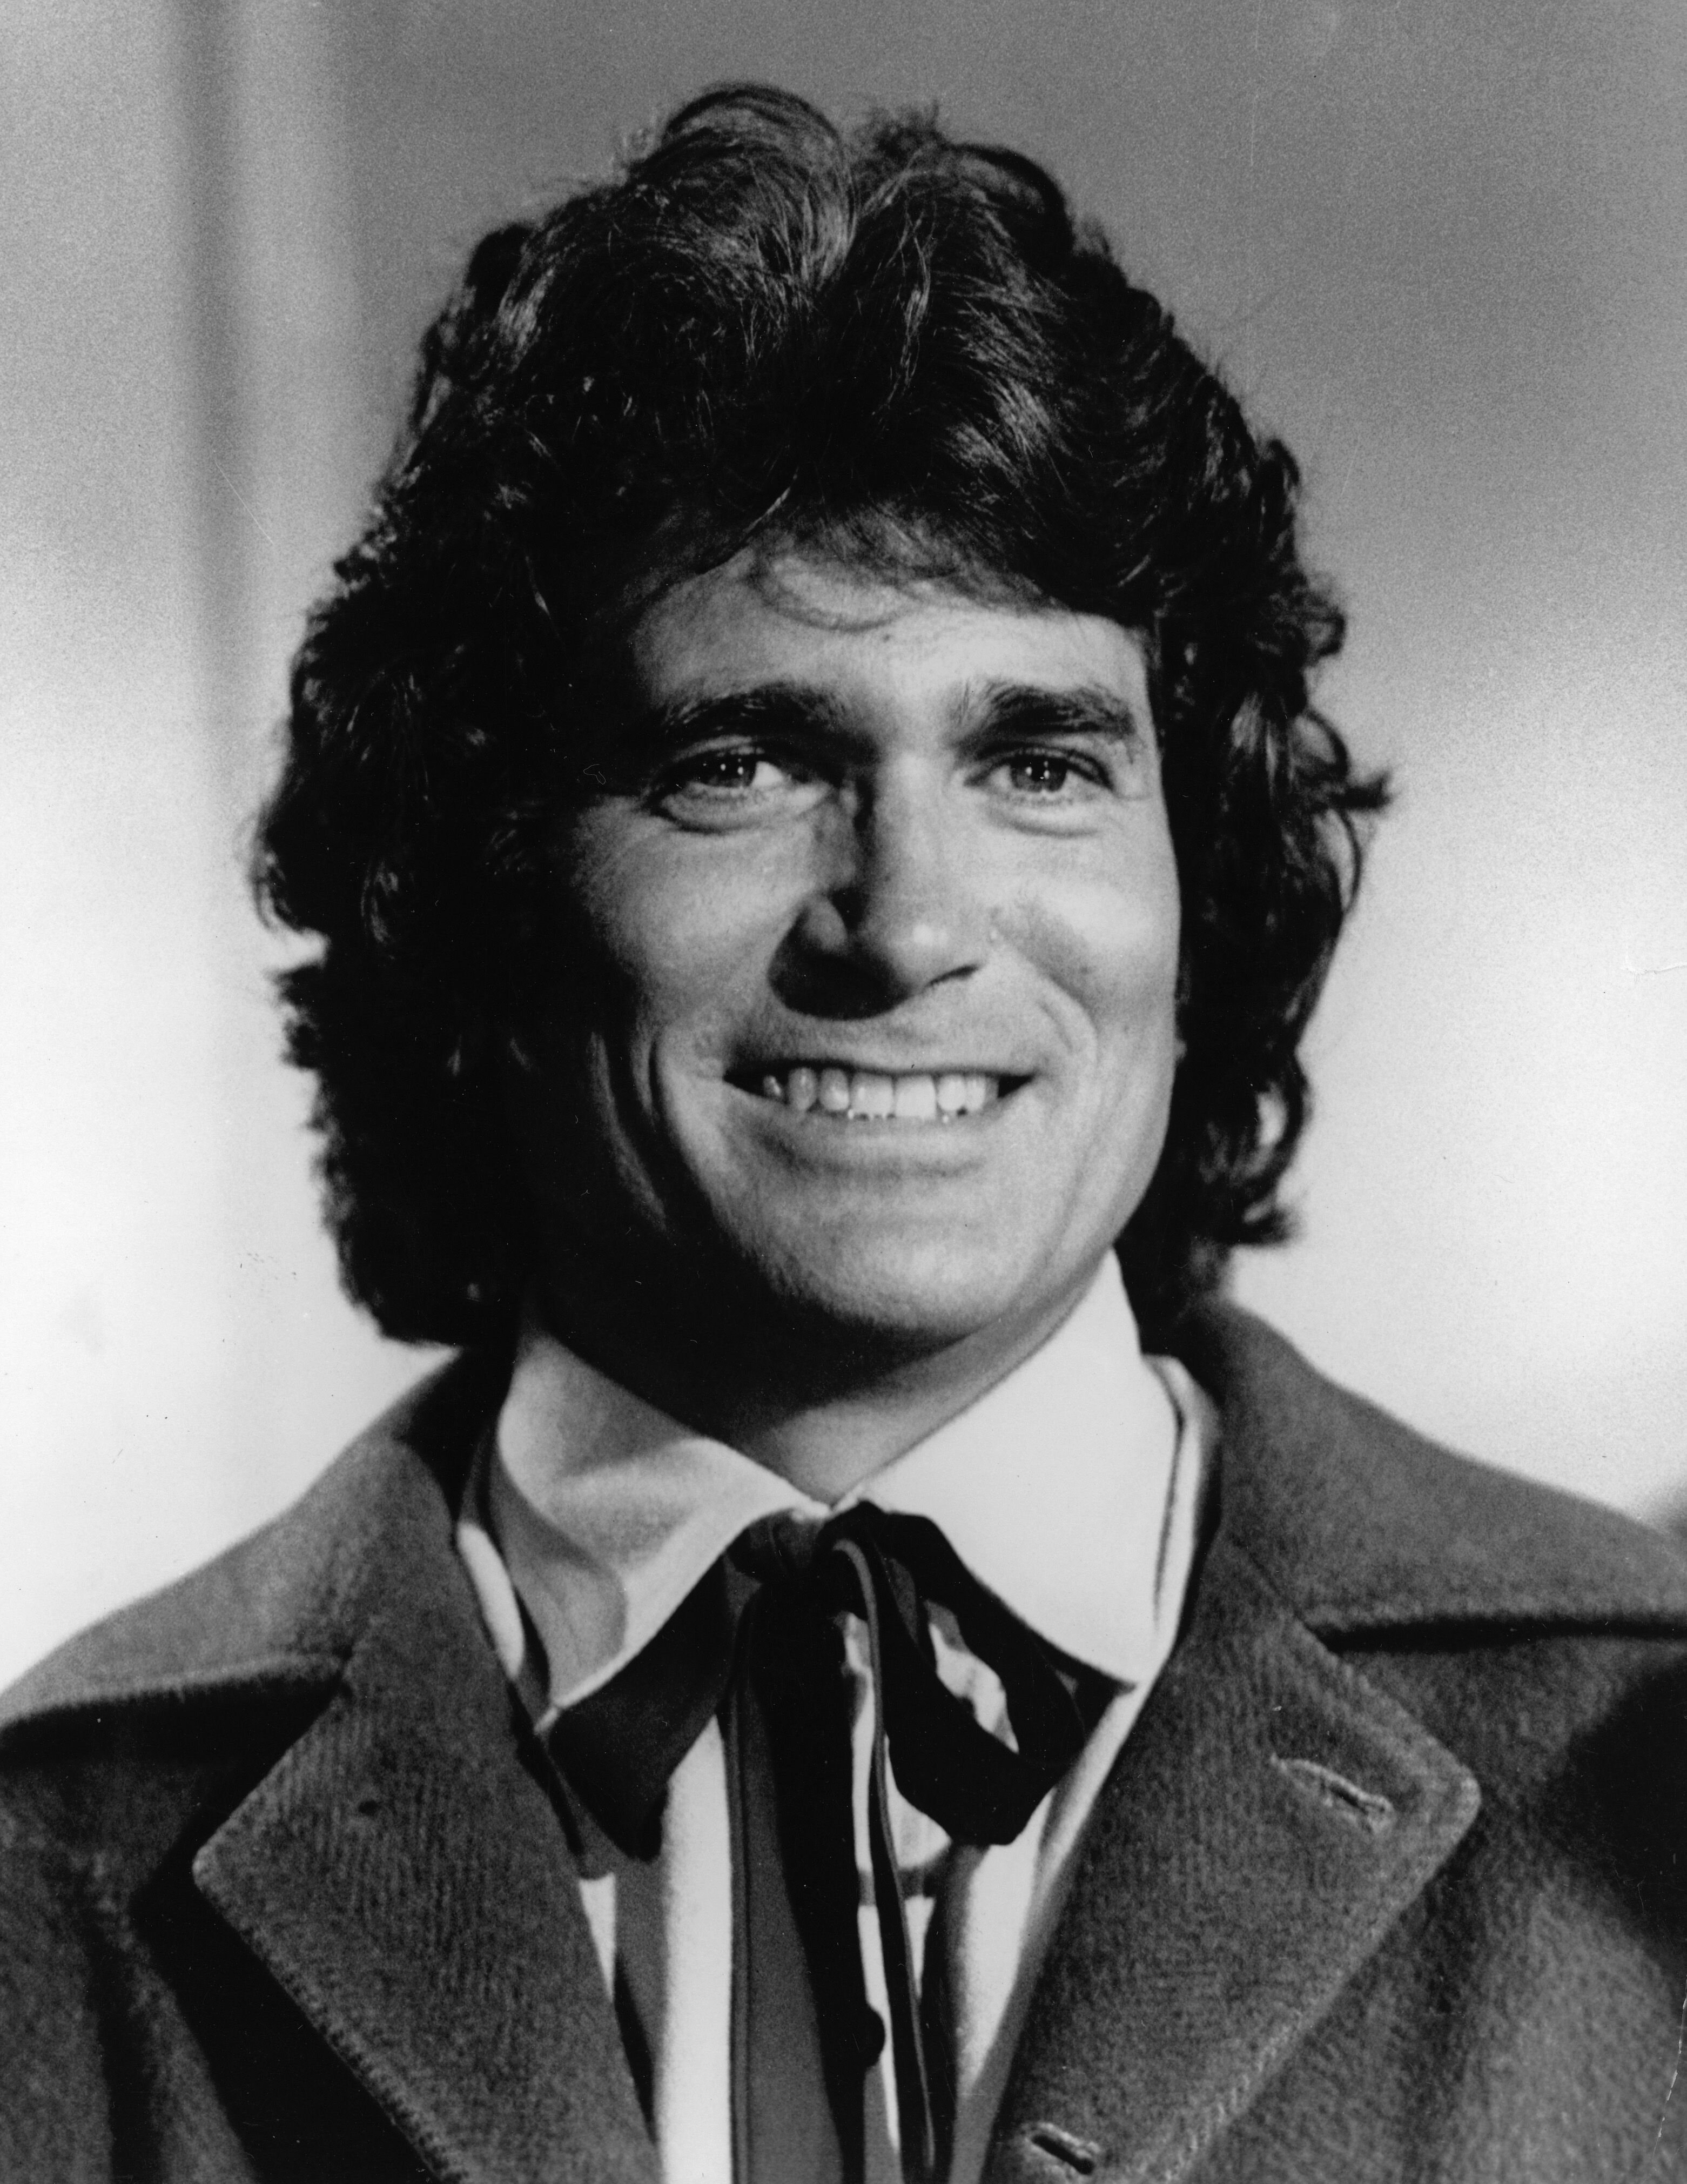 Michael Landon played major roles in Bonanza, Little House on the Prairie, and Highway to Hell. Photo: Getty Images